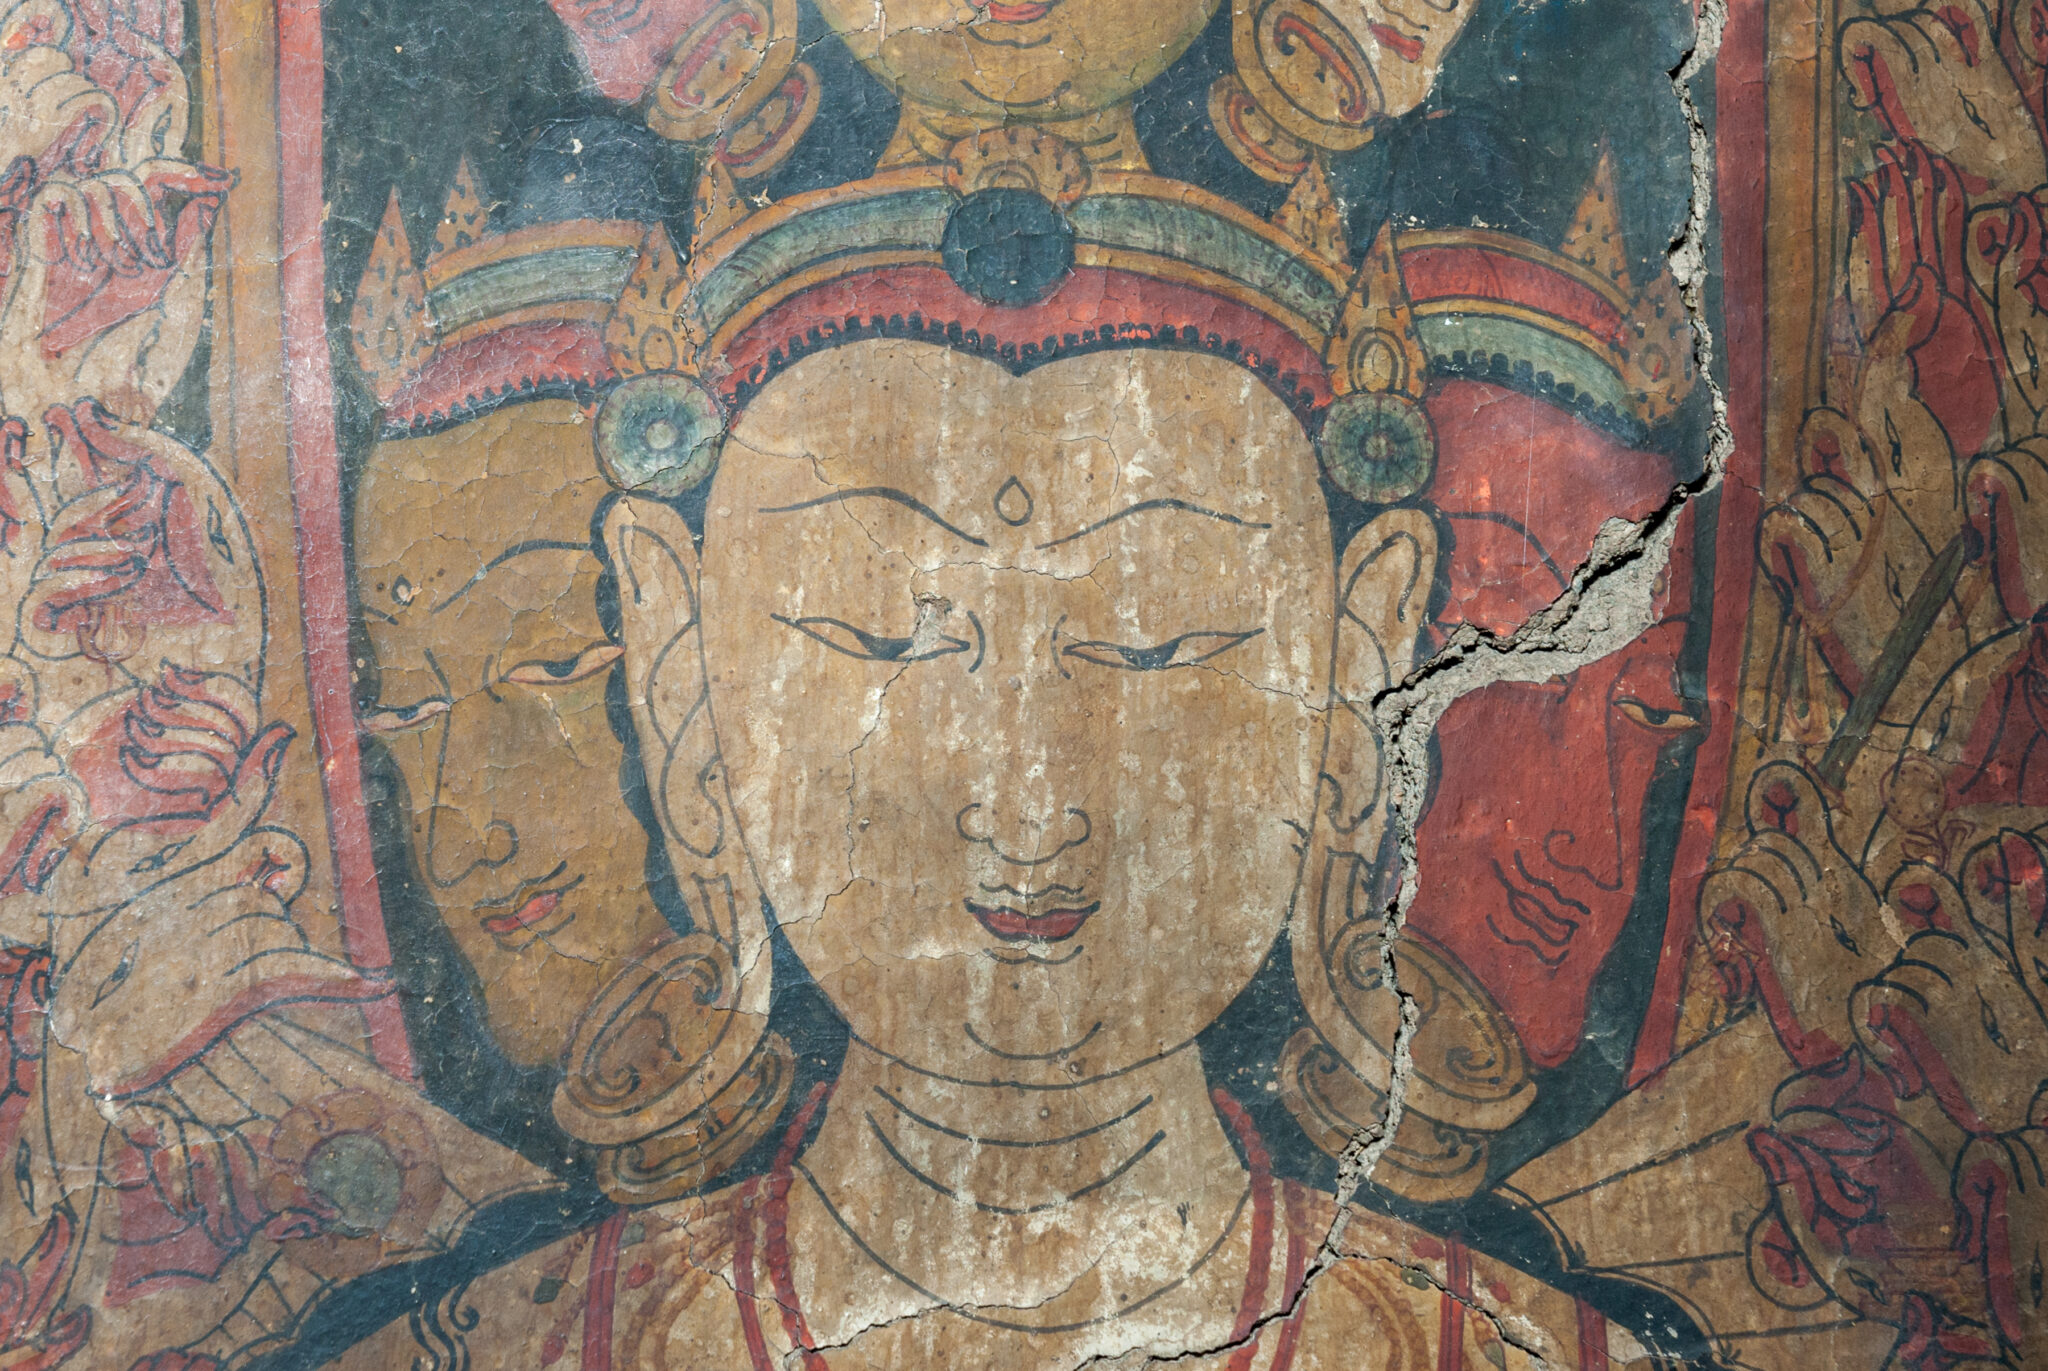 Close view of head and shoulders of eleven-headed Bodhisattva; flanked by dozens of hands posed in mudras